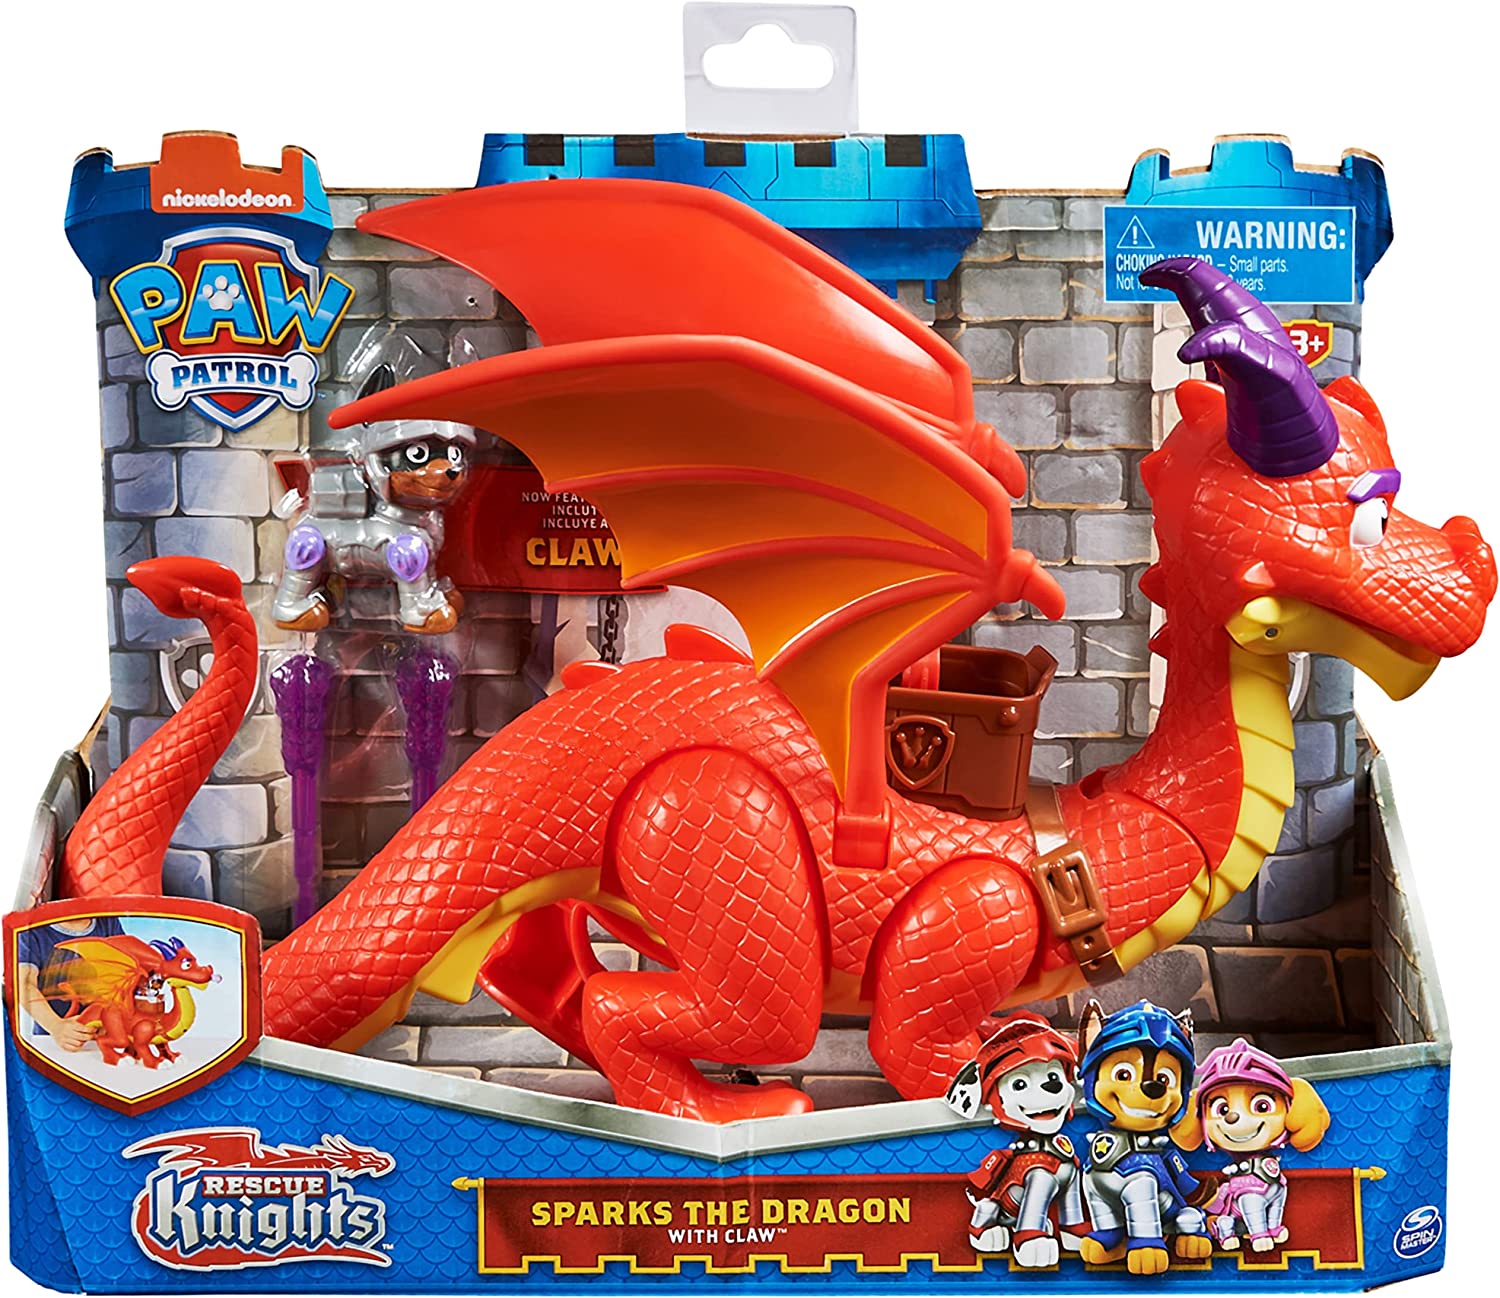 PAW PATROL RESCUE KNIGHTS Sparks The Dragon & Claw